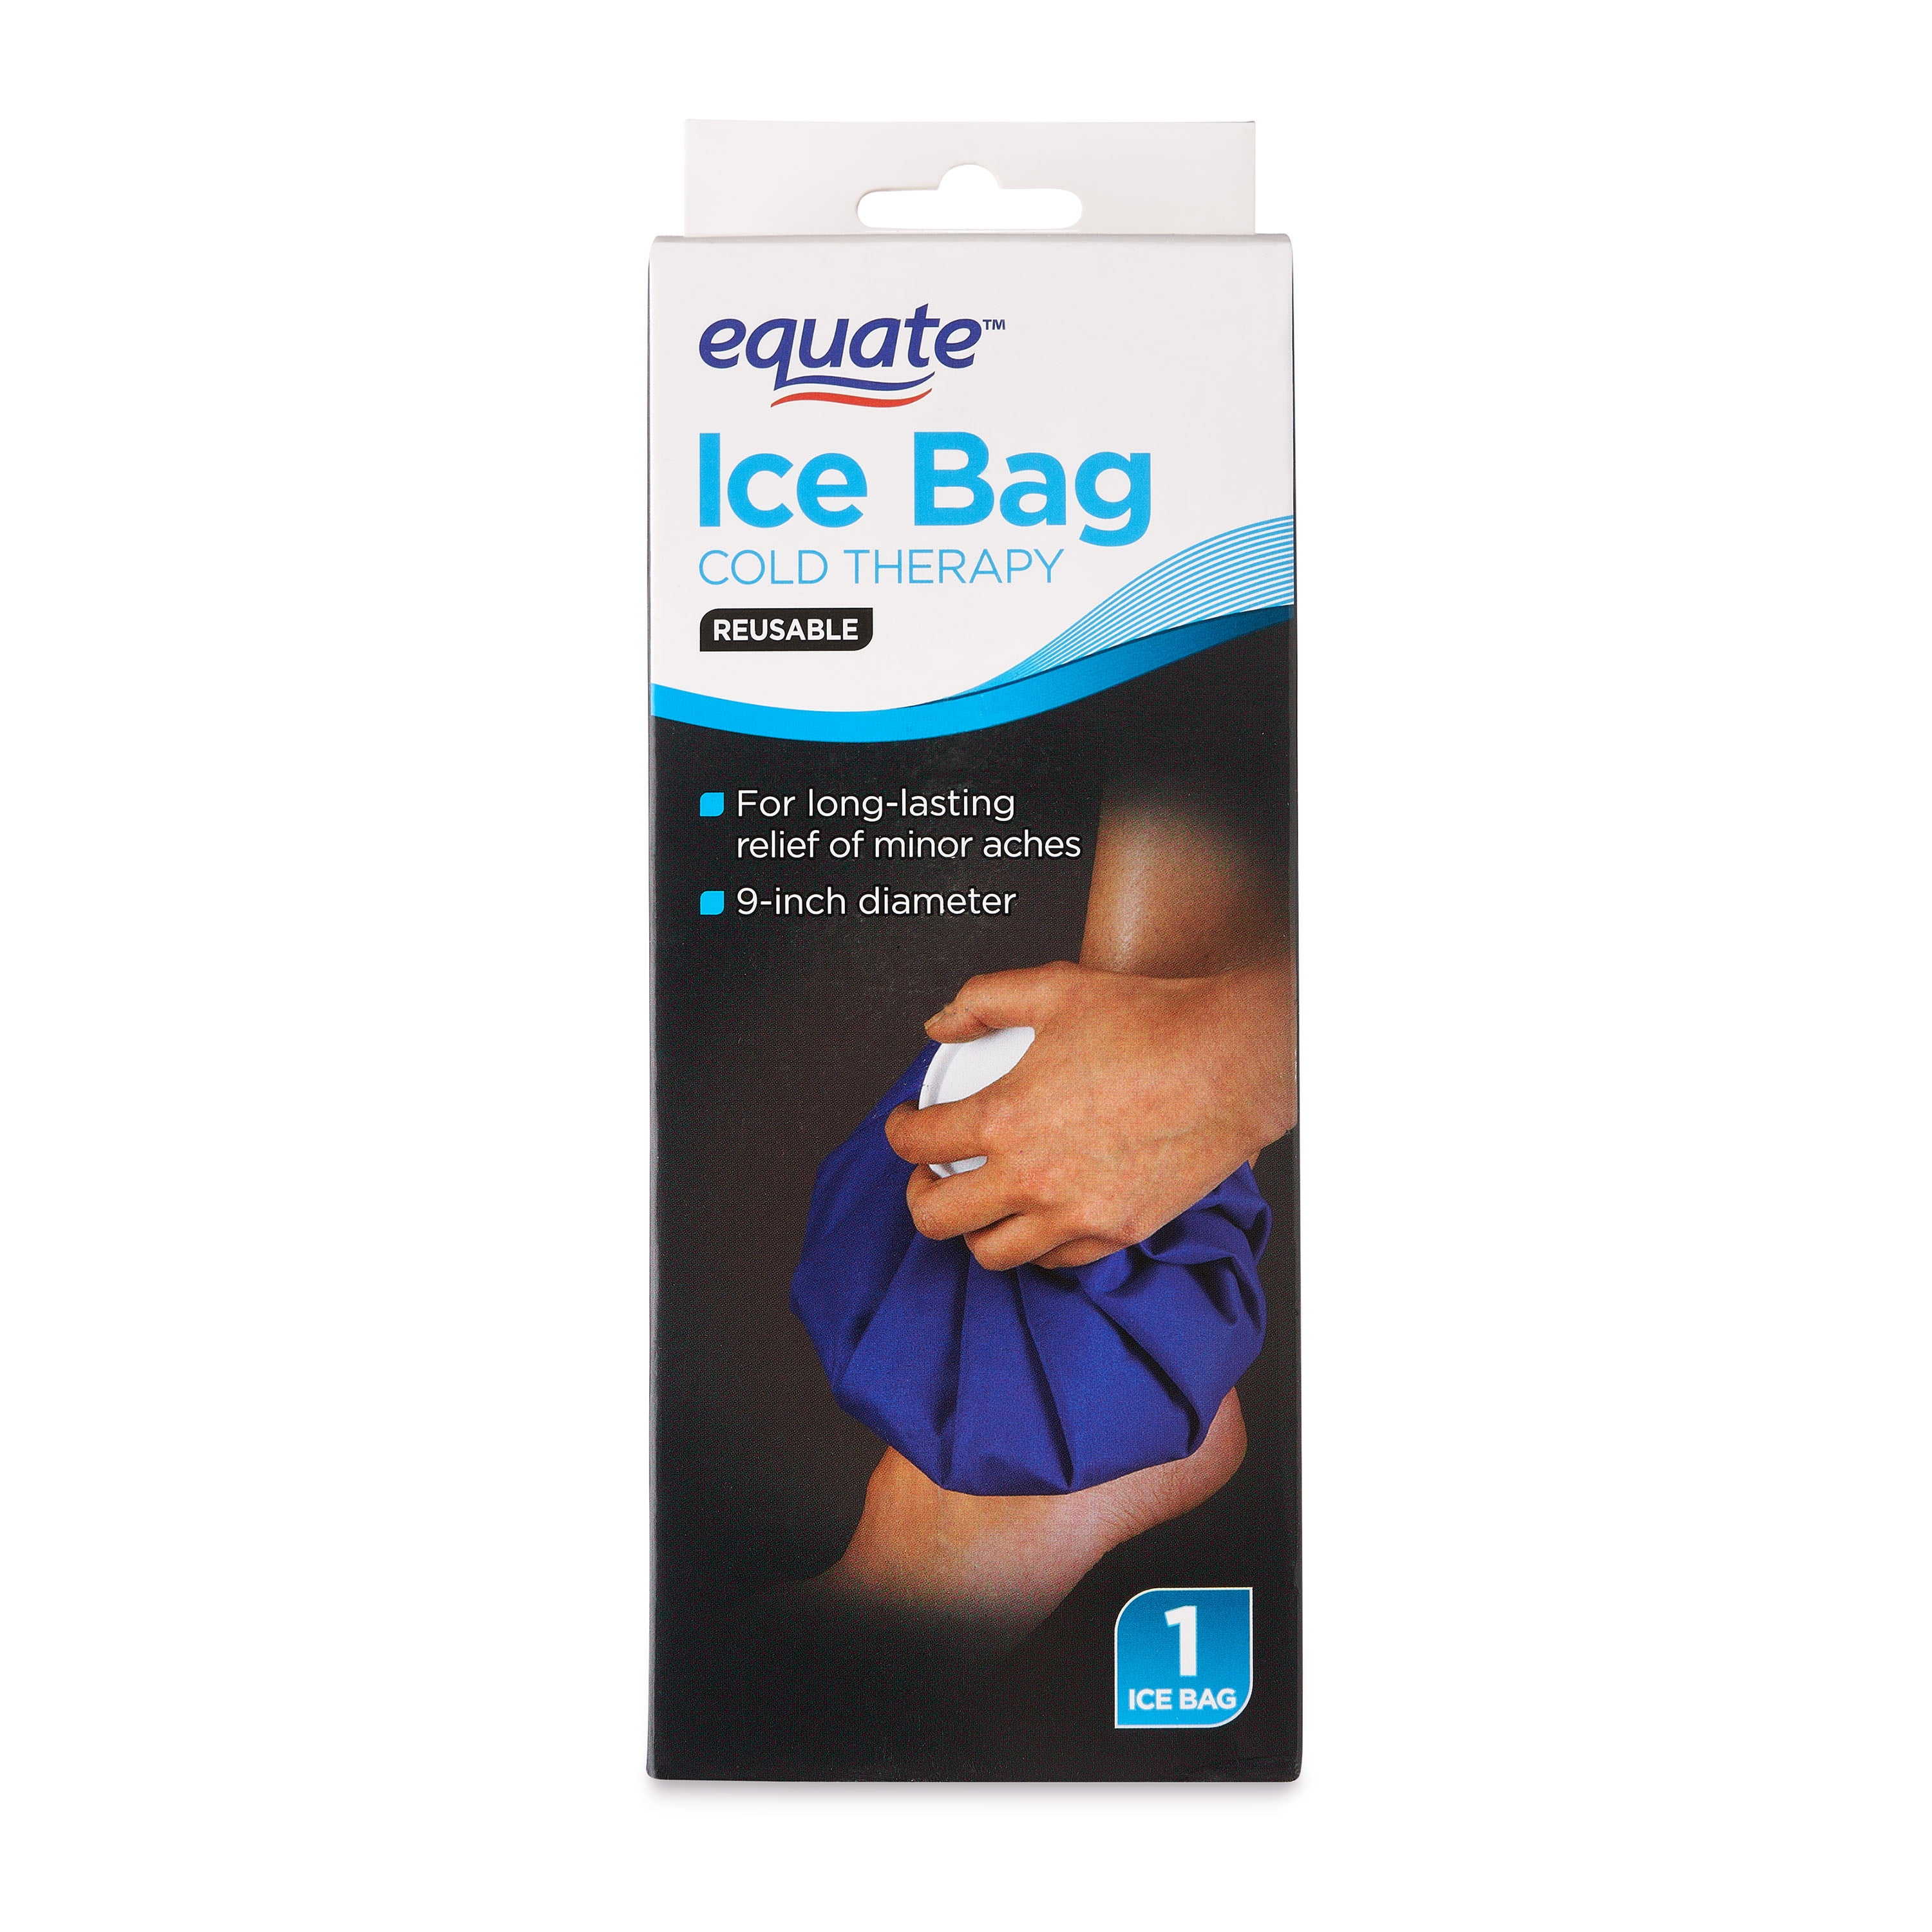 Equate Reusable Cold Therapy Ice Bag, 9